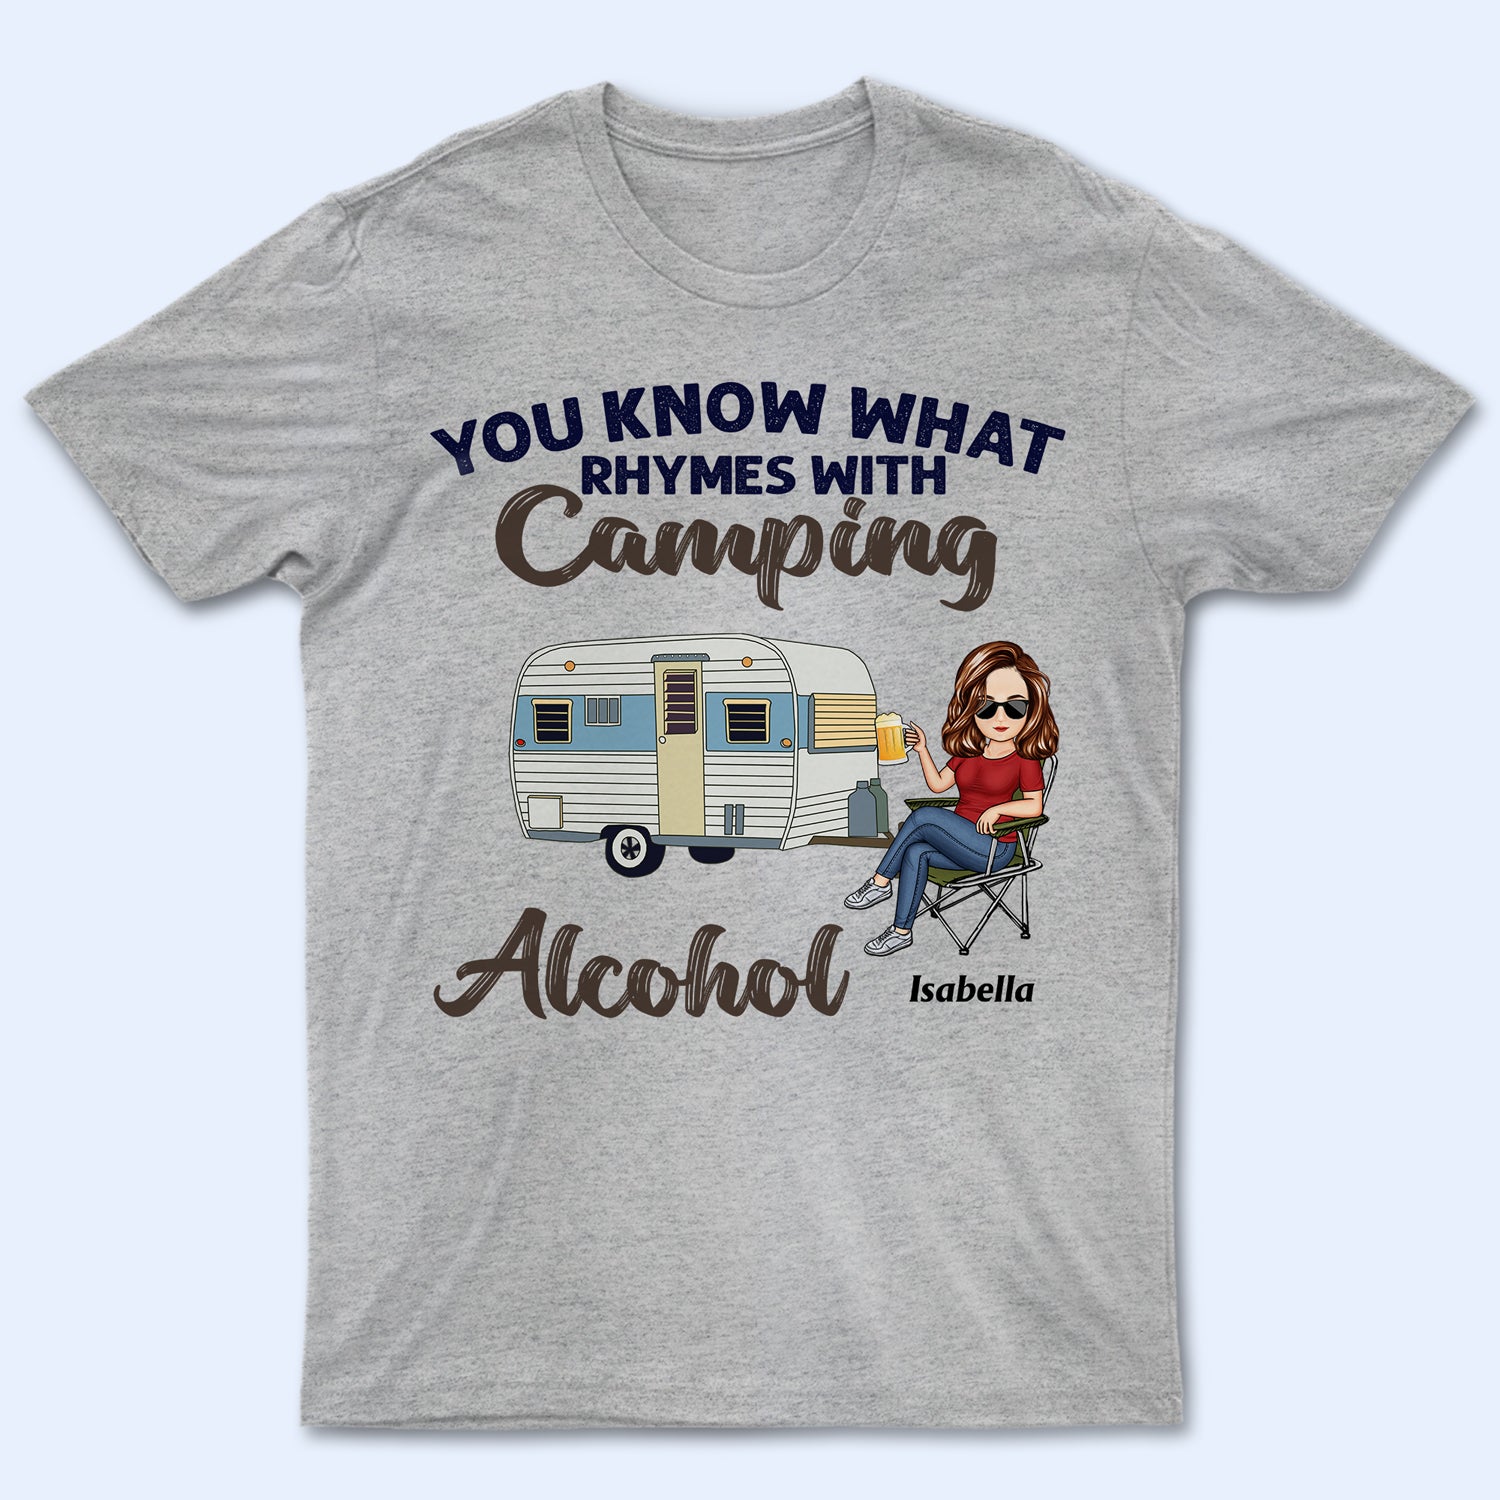 You Know What Rhymes With Camping Alcohol - Birthday, Funny Gift For Her, Him, Campers - Personalized Custom T Shirt